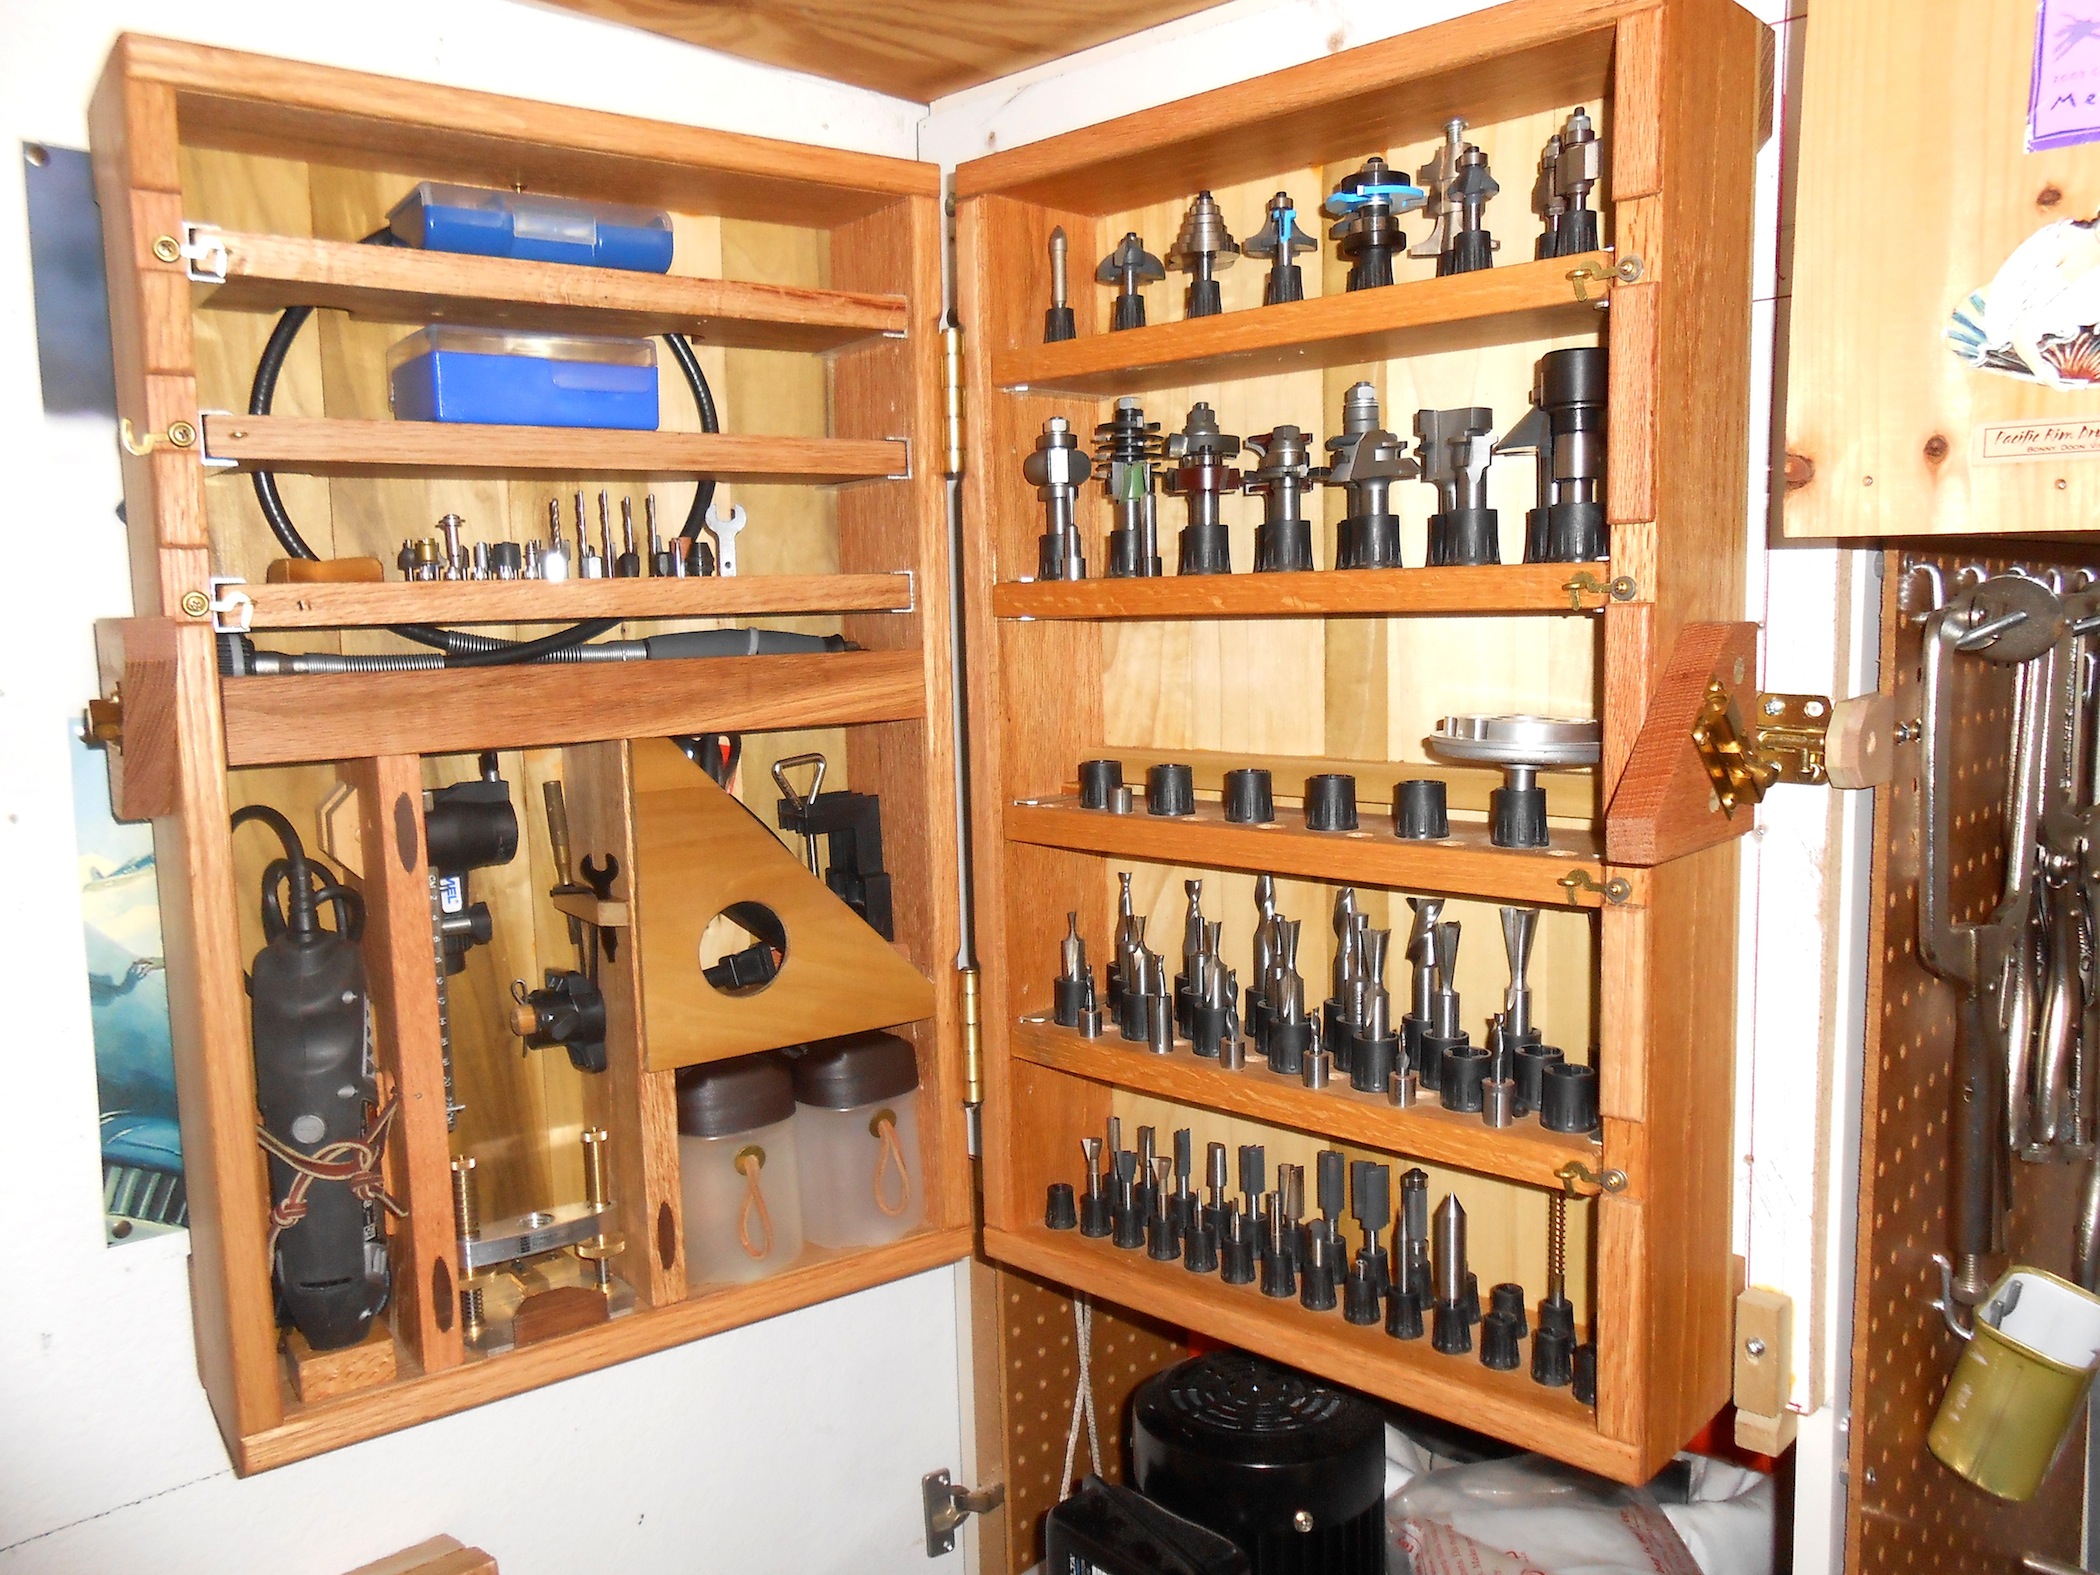 Woodworker’s Solutions to Router Bit Storage - Popular ...